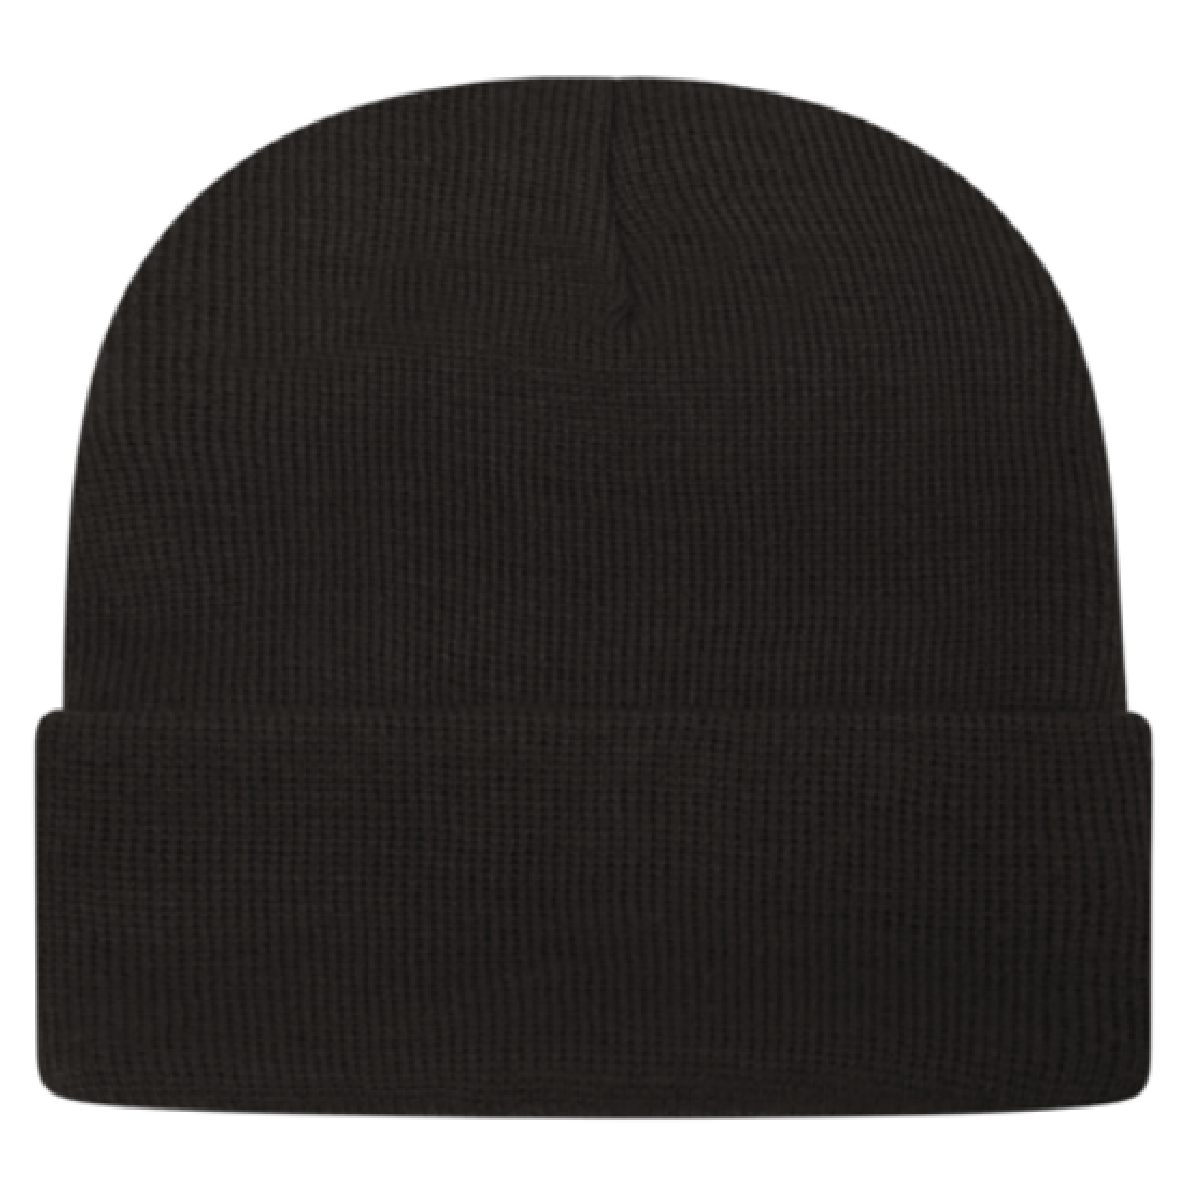 Black USA Made Sustainable Knit Cap with Cuff